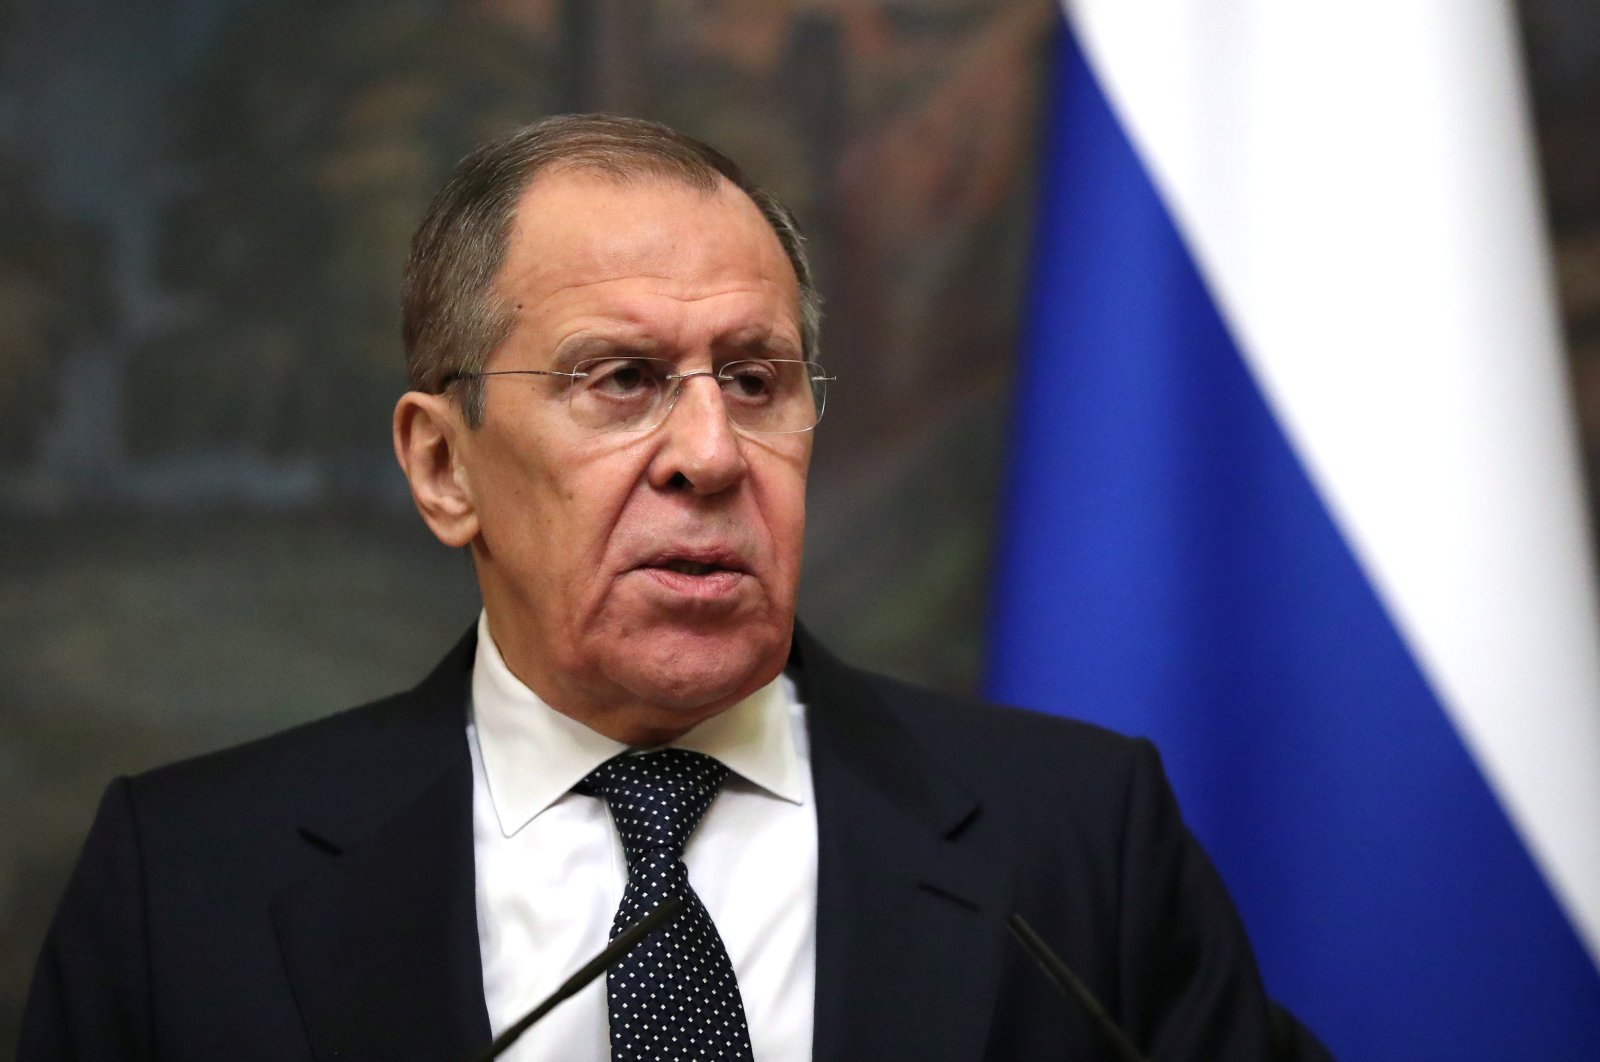 Russian Foreign Minister Sergei Lavrov attends a news conference with his Jordanian counterpart Ayman Safadi following their talks in Moscow, Russia February 19, 2020. (Reuters Photo)